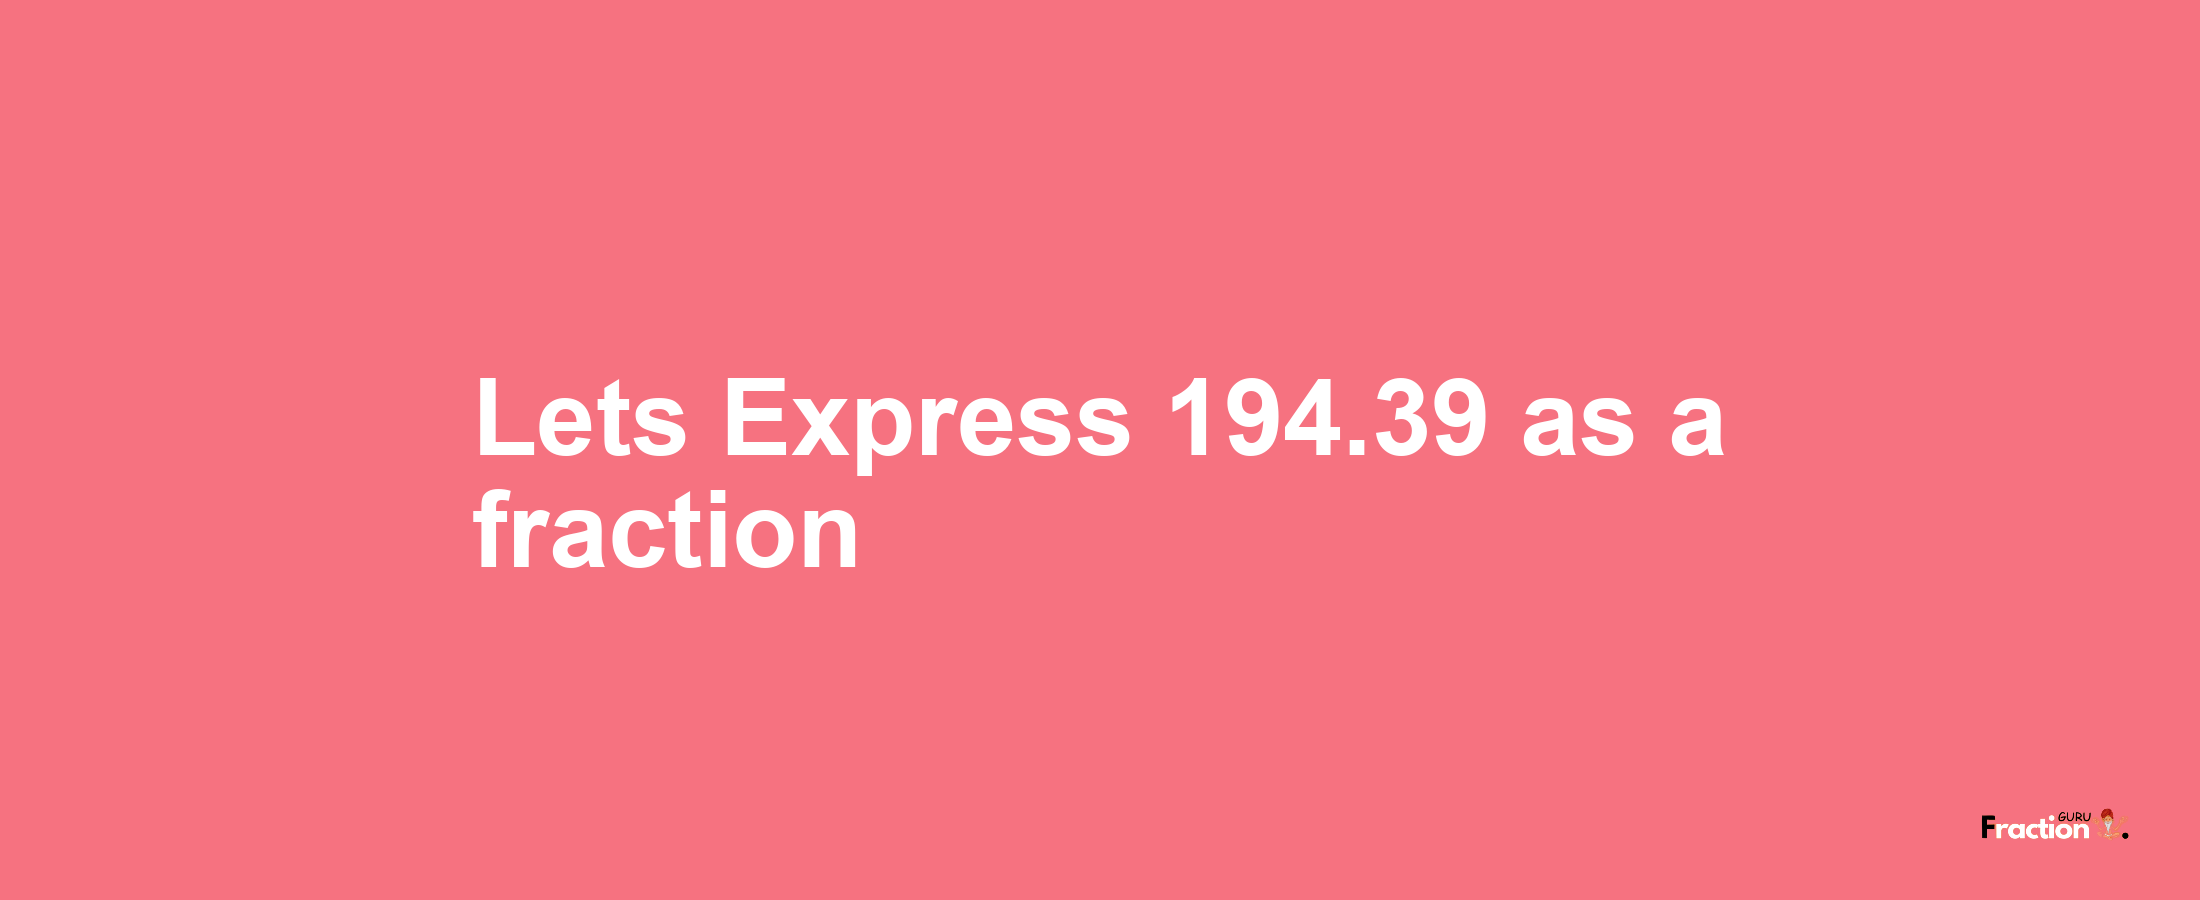 Lets Express 194.39 as afraction